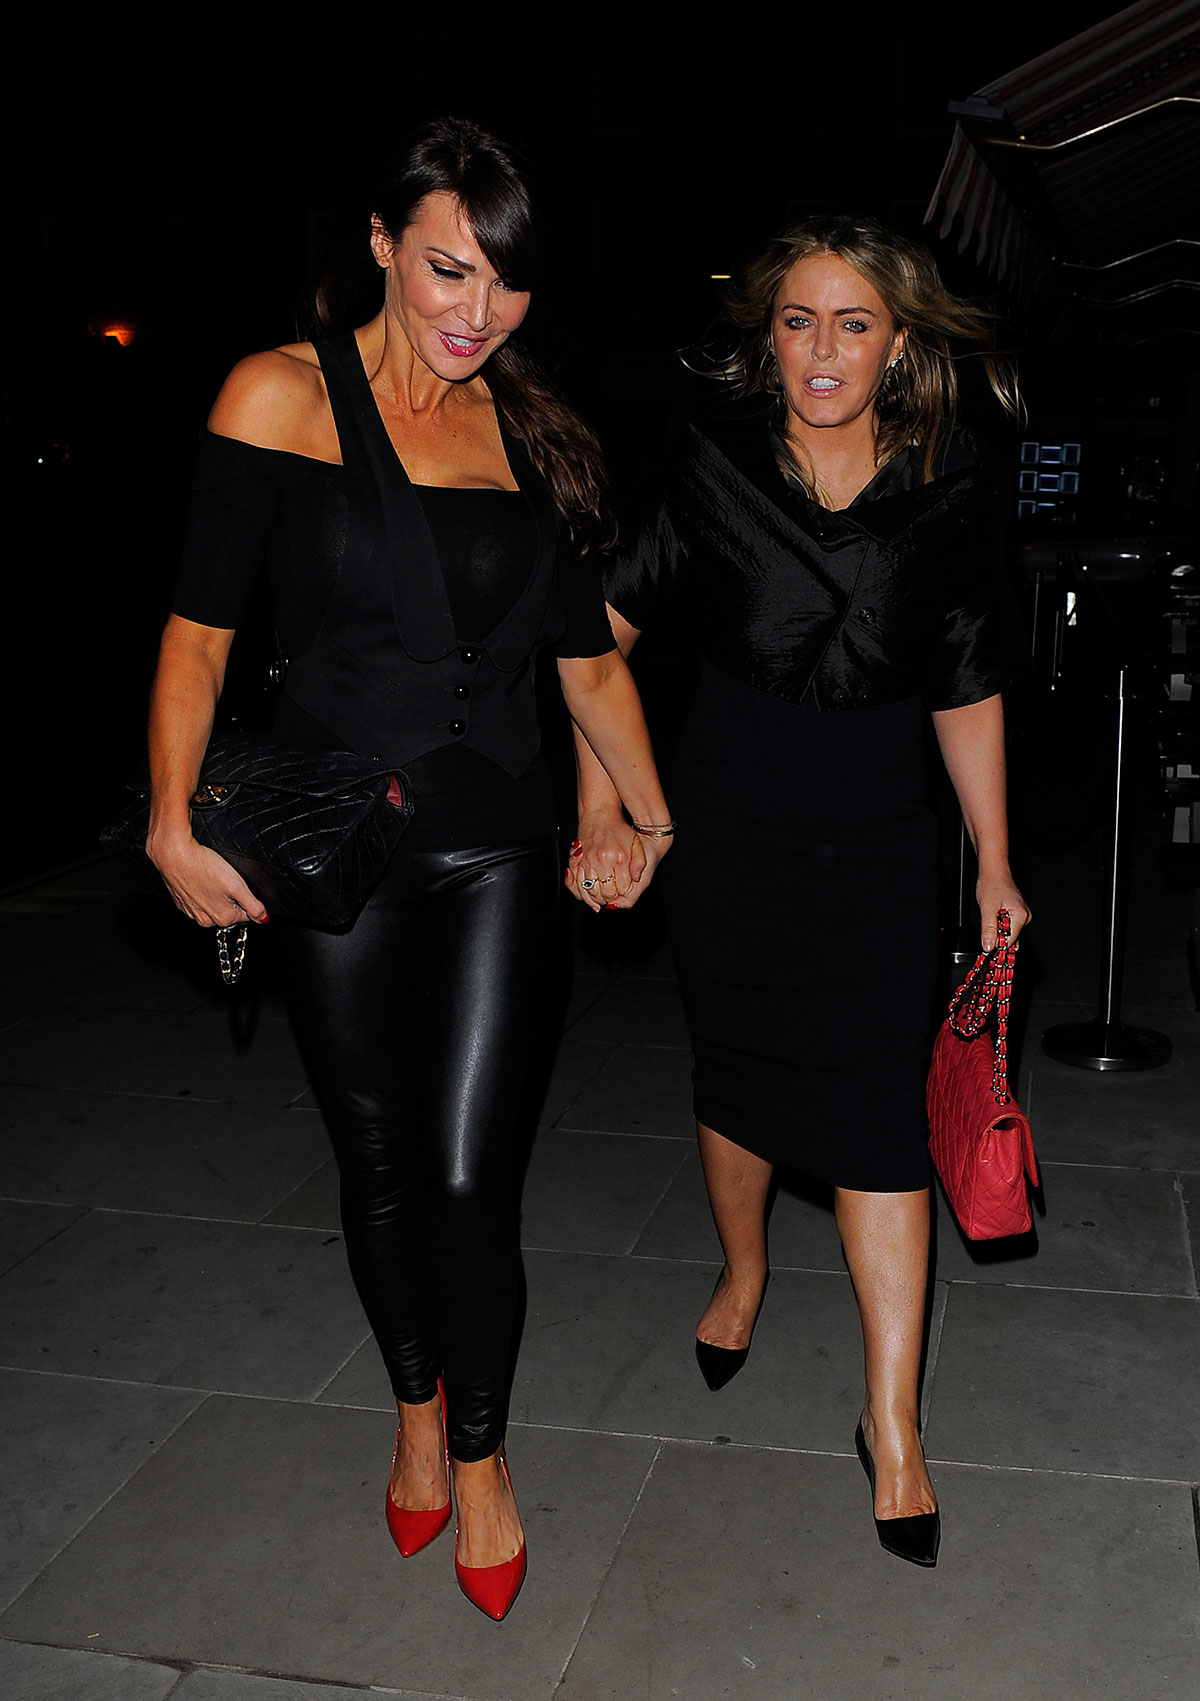 Lizzie Cundy at The Chiltern Firehouse in London